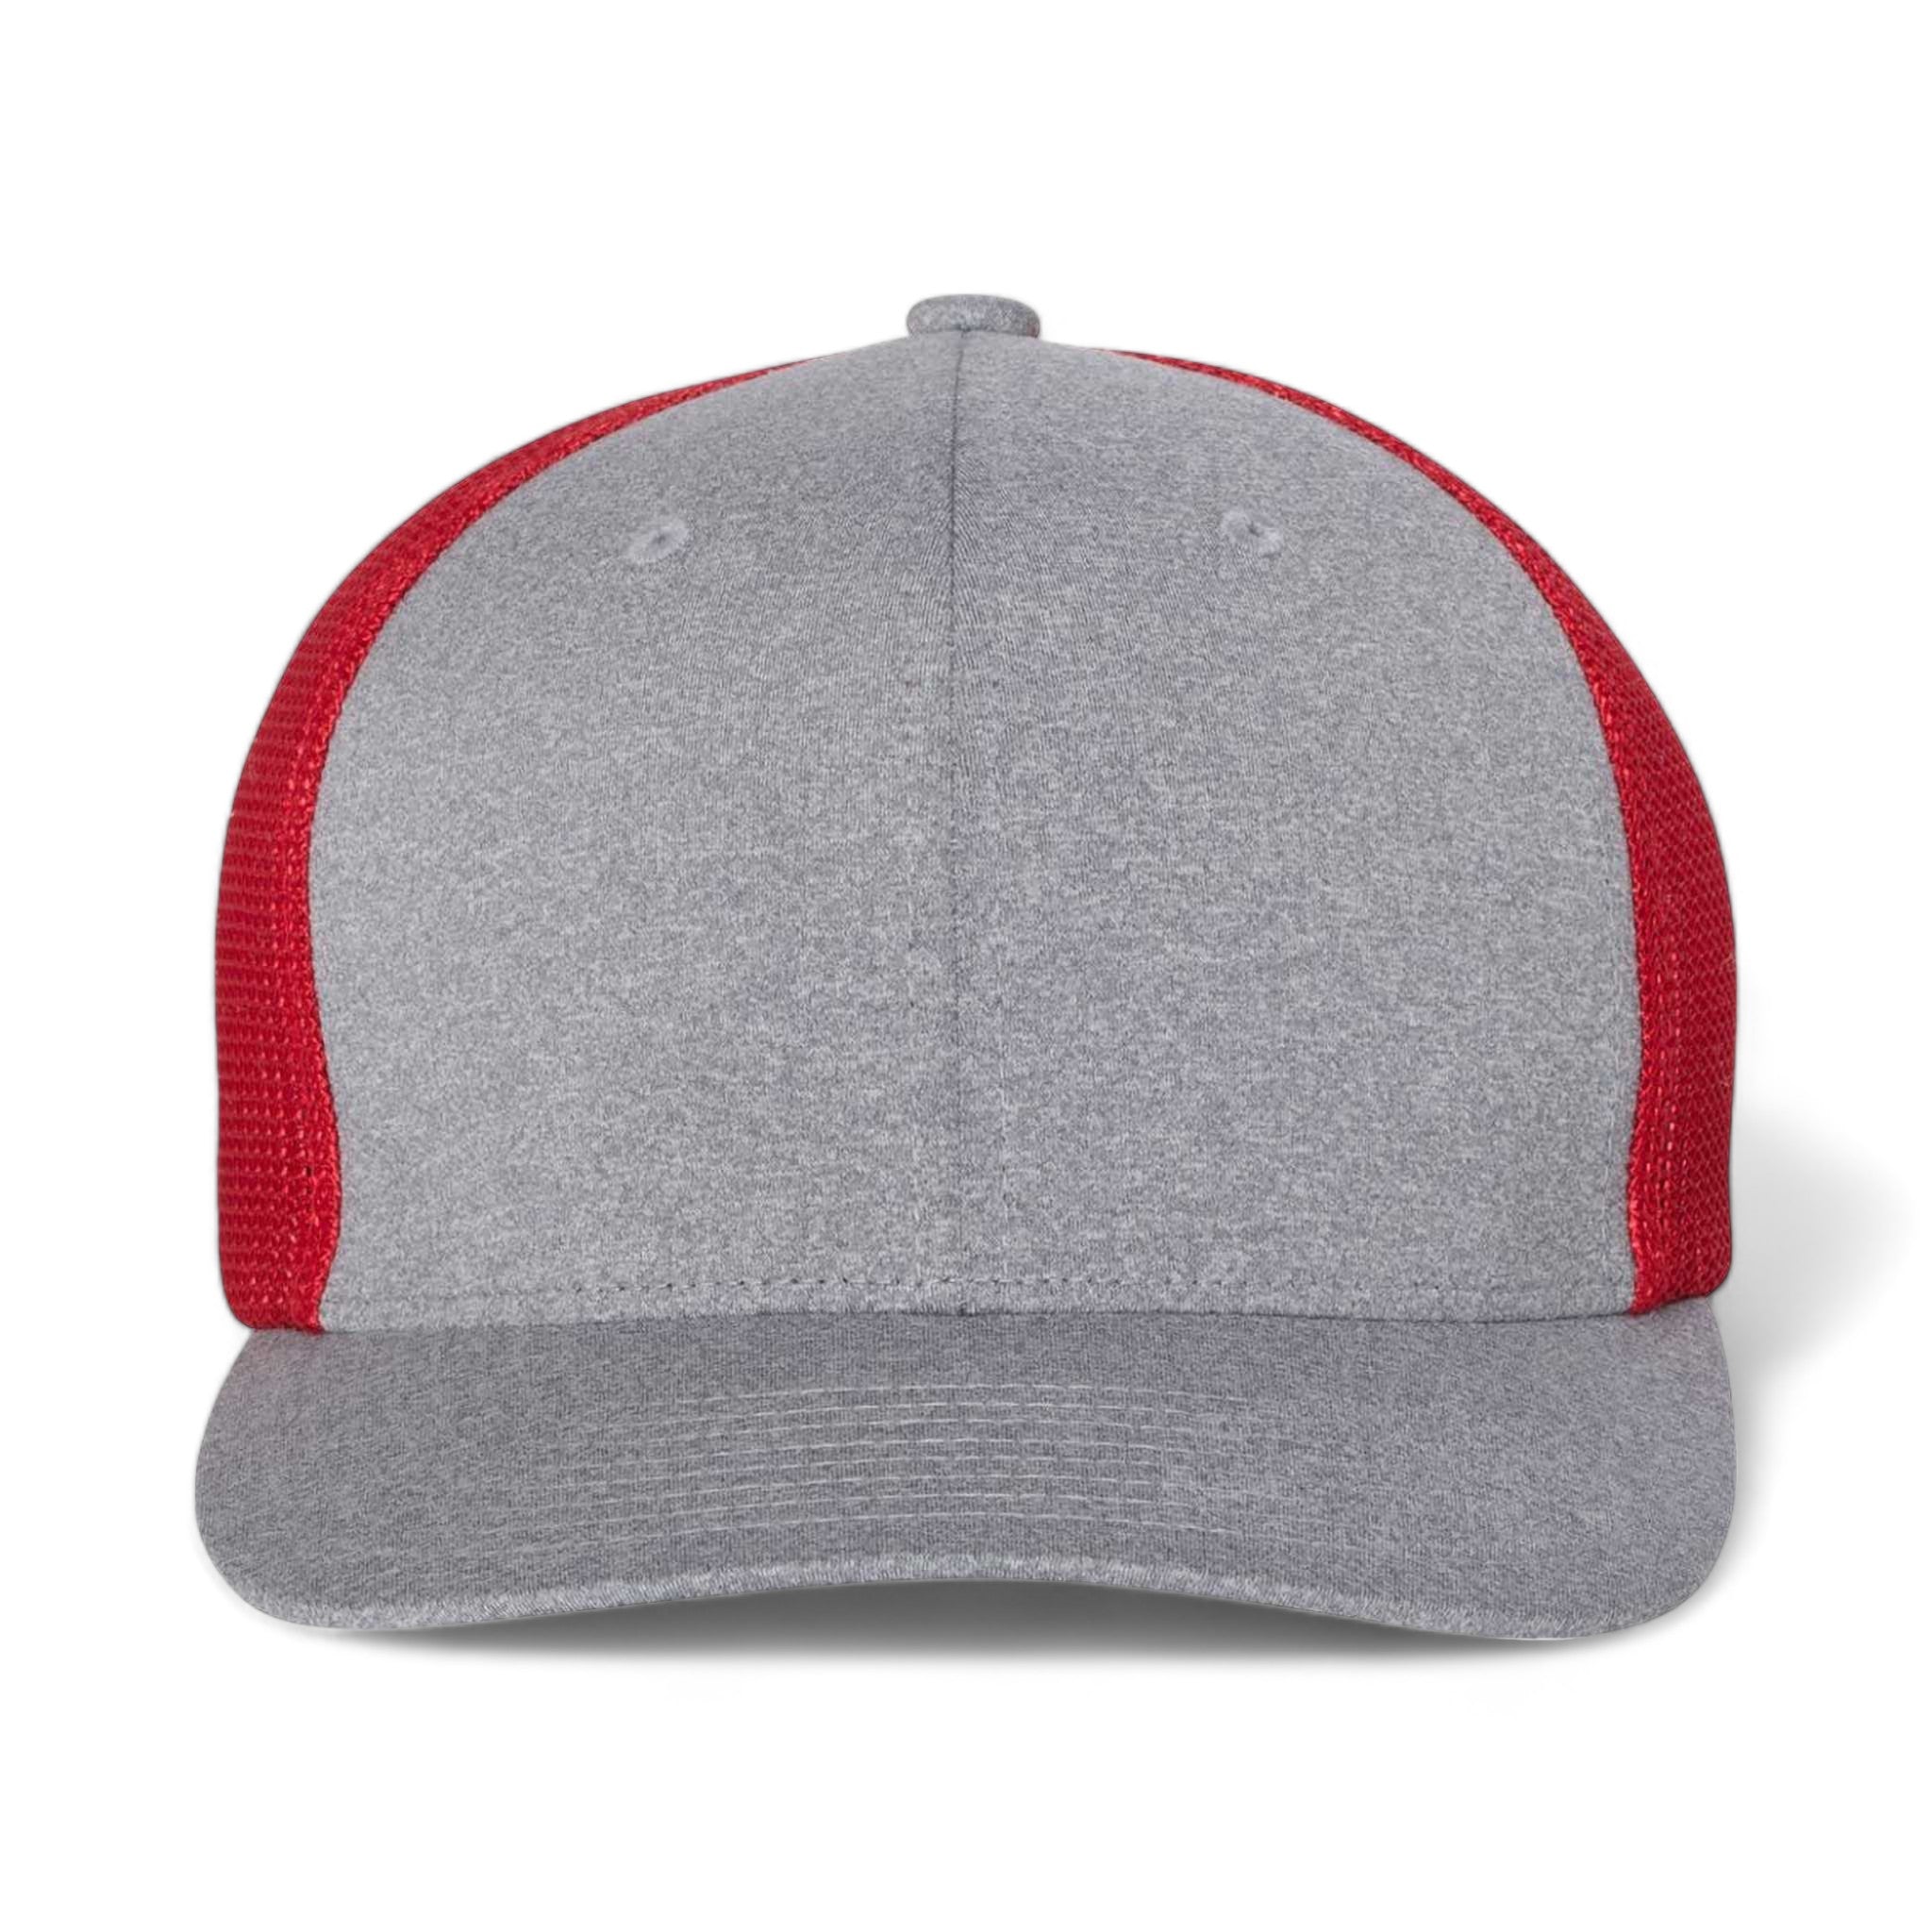 Front view of Flexfit 6311 custom hat in heather grey and red